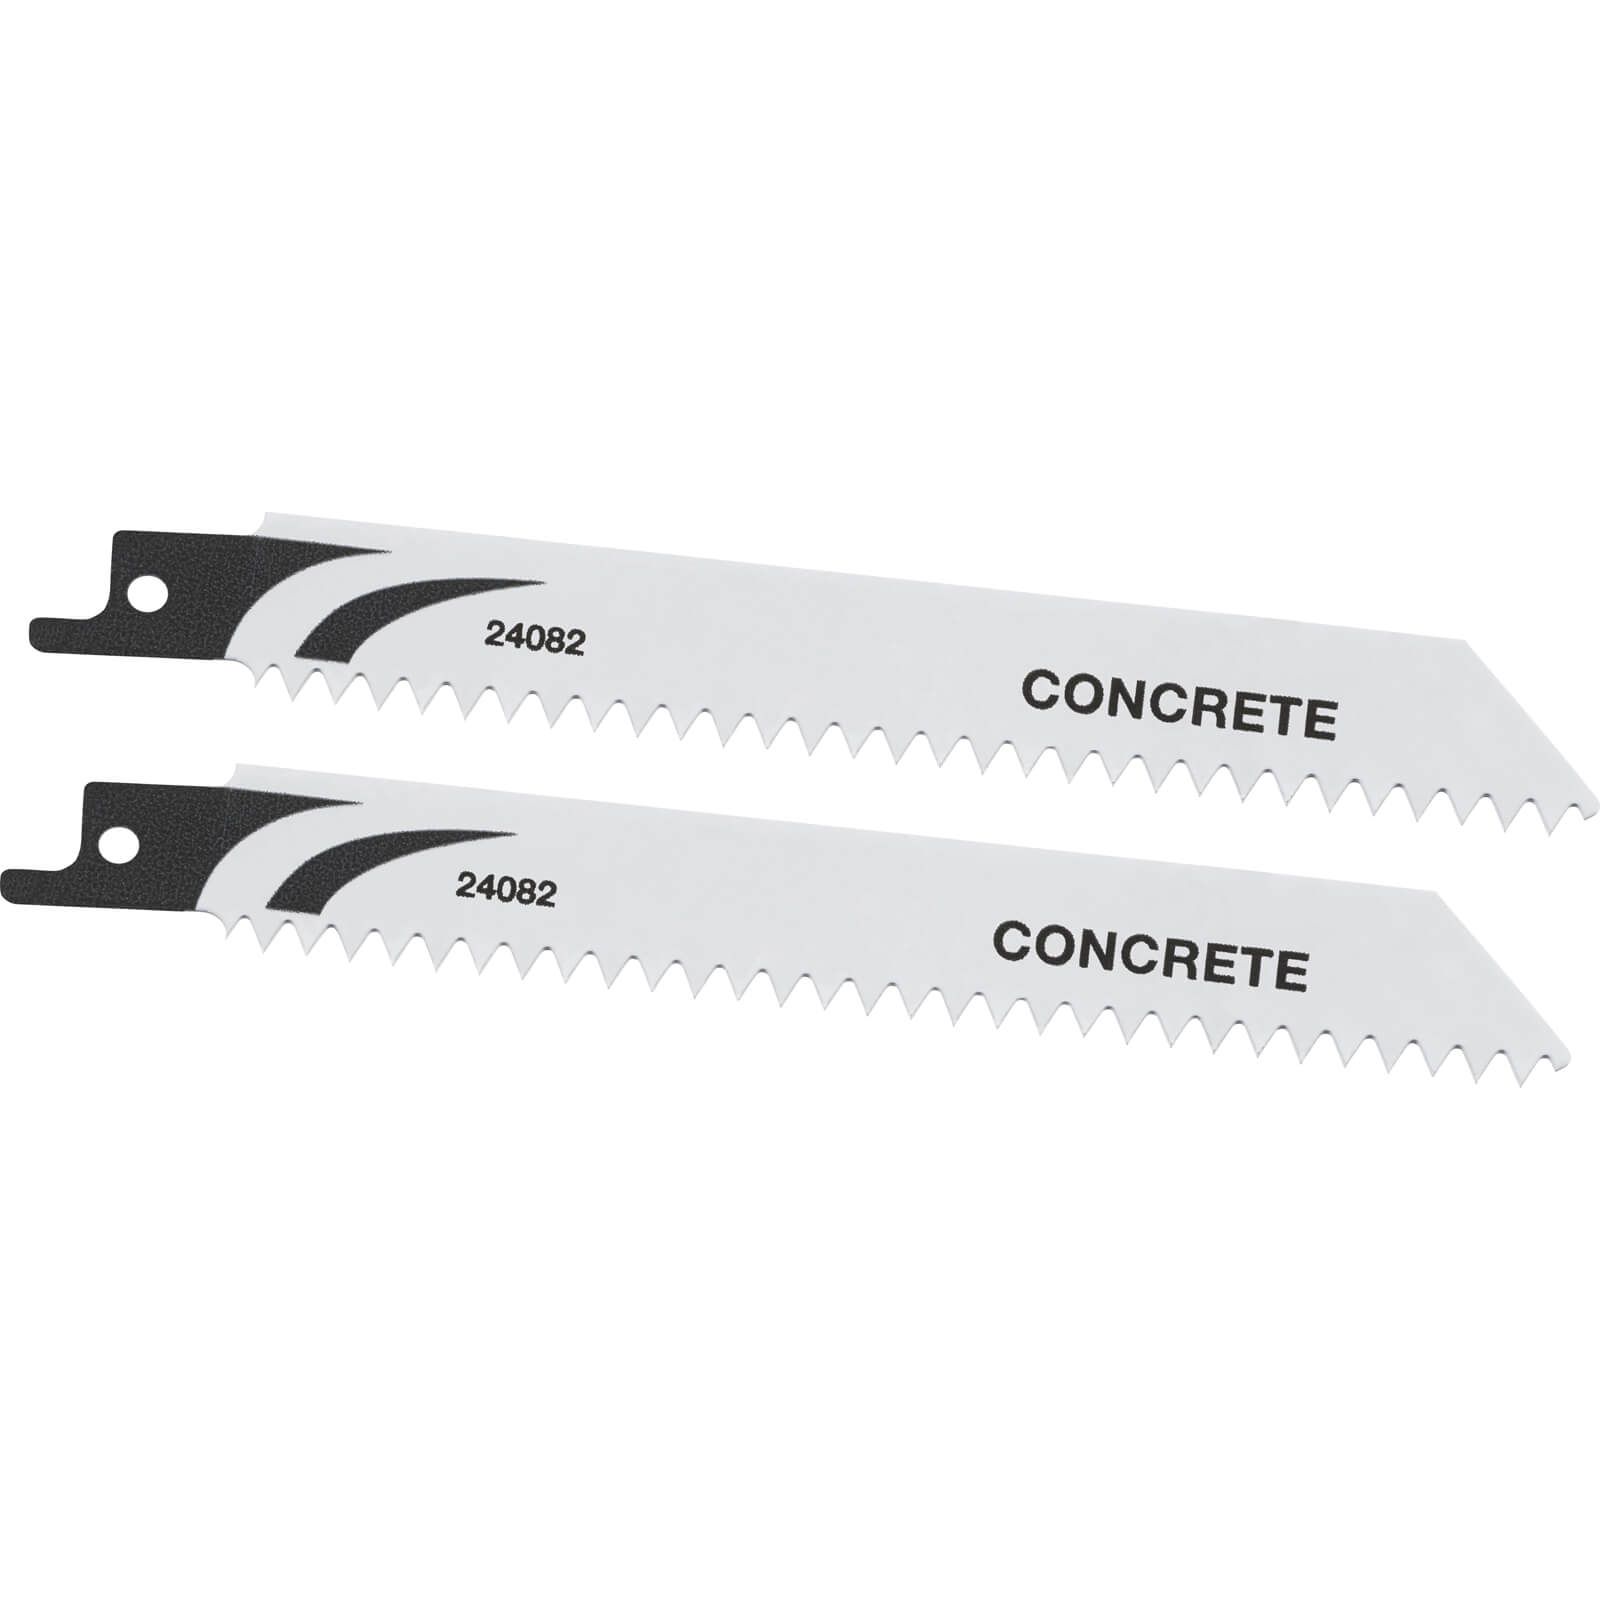 Photos - Power Tool Accessory Stanley Concrete Cutting Reciprocating Saw Blades 152mm Pack of 2 STA24082 